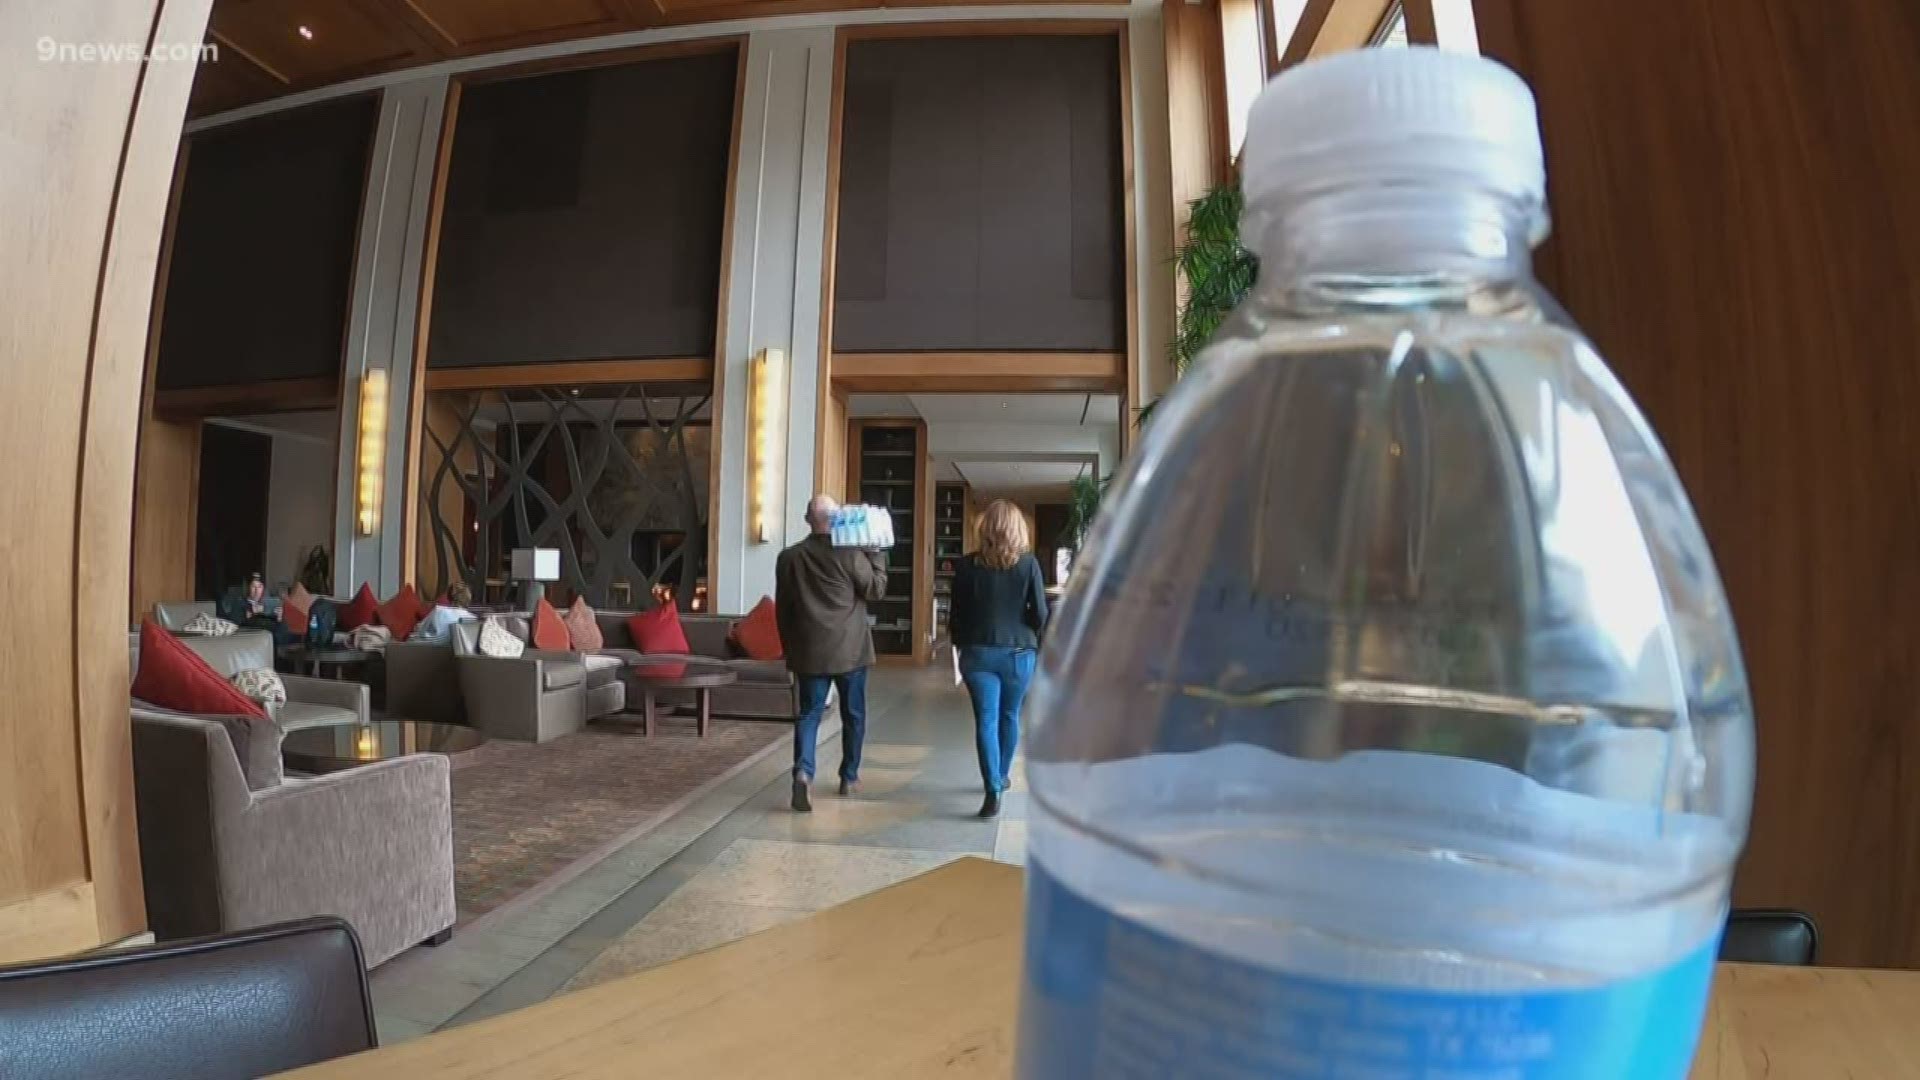 The Westin near Beaver Creek will stop using plastic water bottles May 1 and also plans to eliminate travel toiletries later this year.